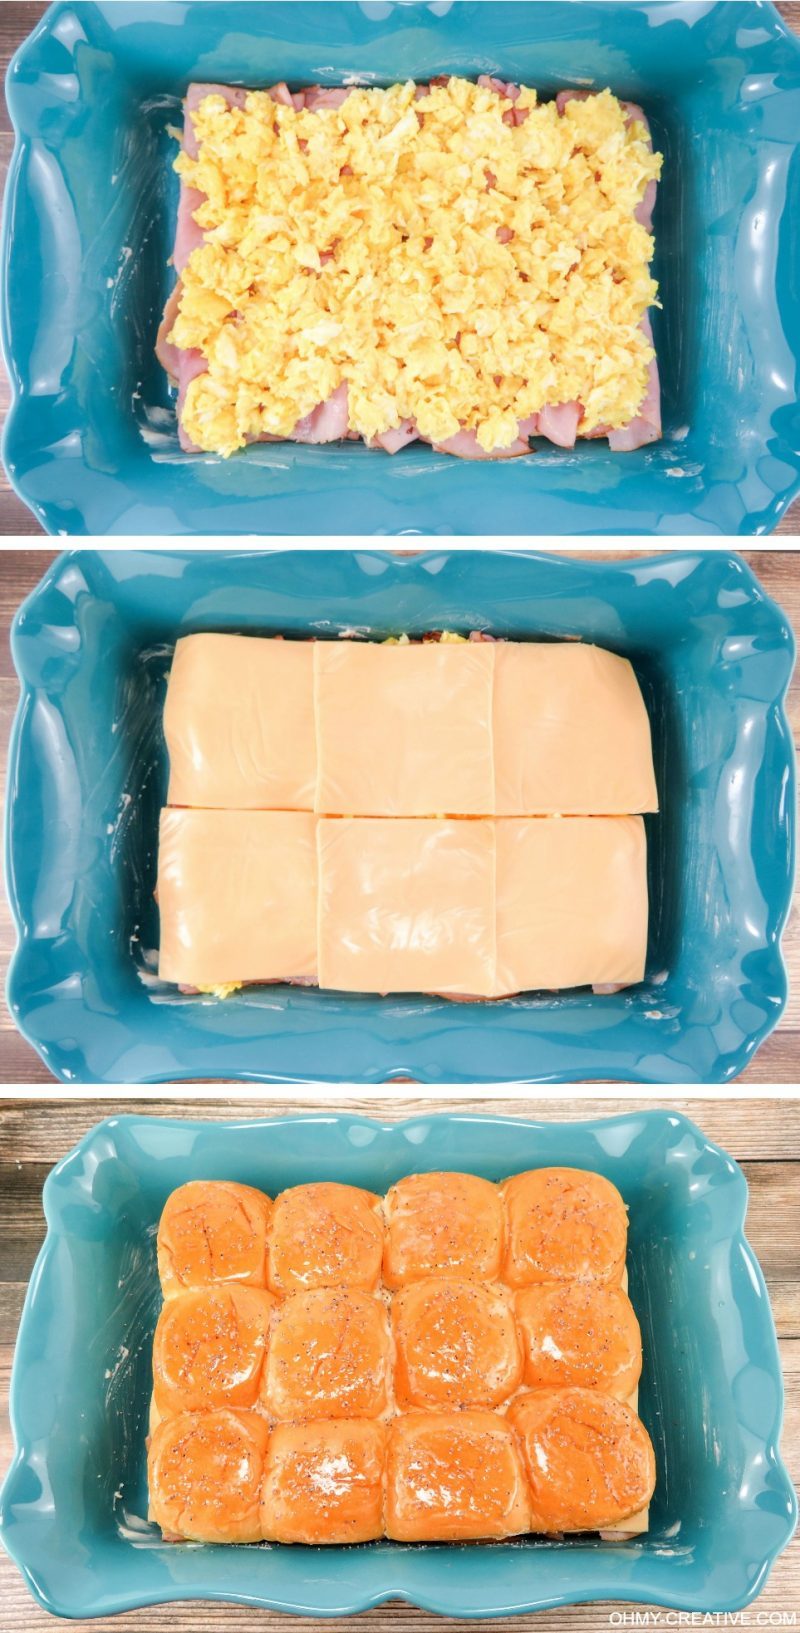 These Breakfast Hawaiian Ham and Cheese Sliders are perfect to serve for breakfast, brunch or dinner! OHMY-CREATIVE.COM | game day sliders | brunch sliders | breakfast sliders | egg sliders | ham and cheese sliders | egg recipe | breakfast recipe | brunch recipe | Kings Hawaiian rolls | kings Hawaiian sliders